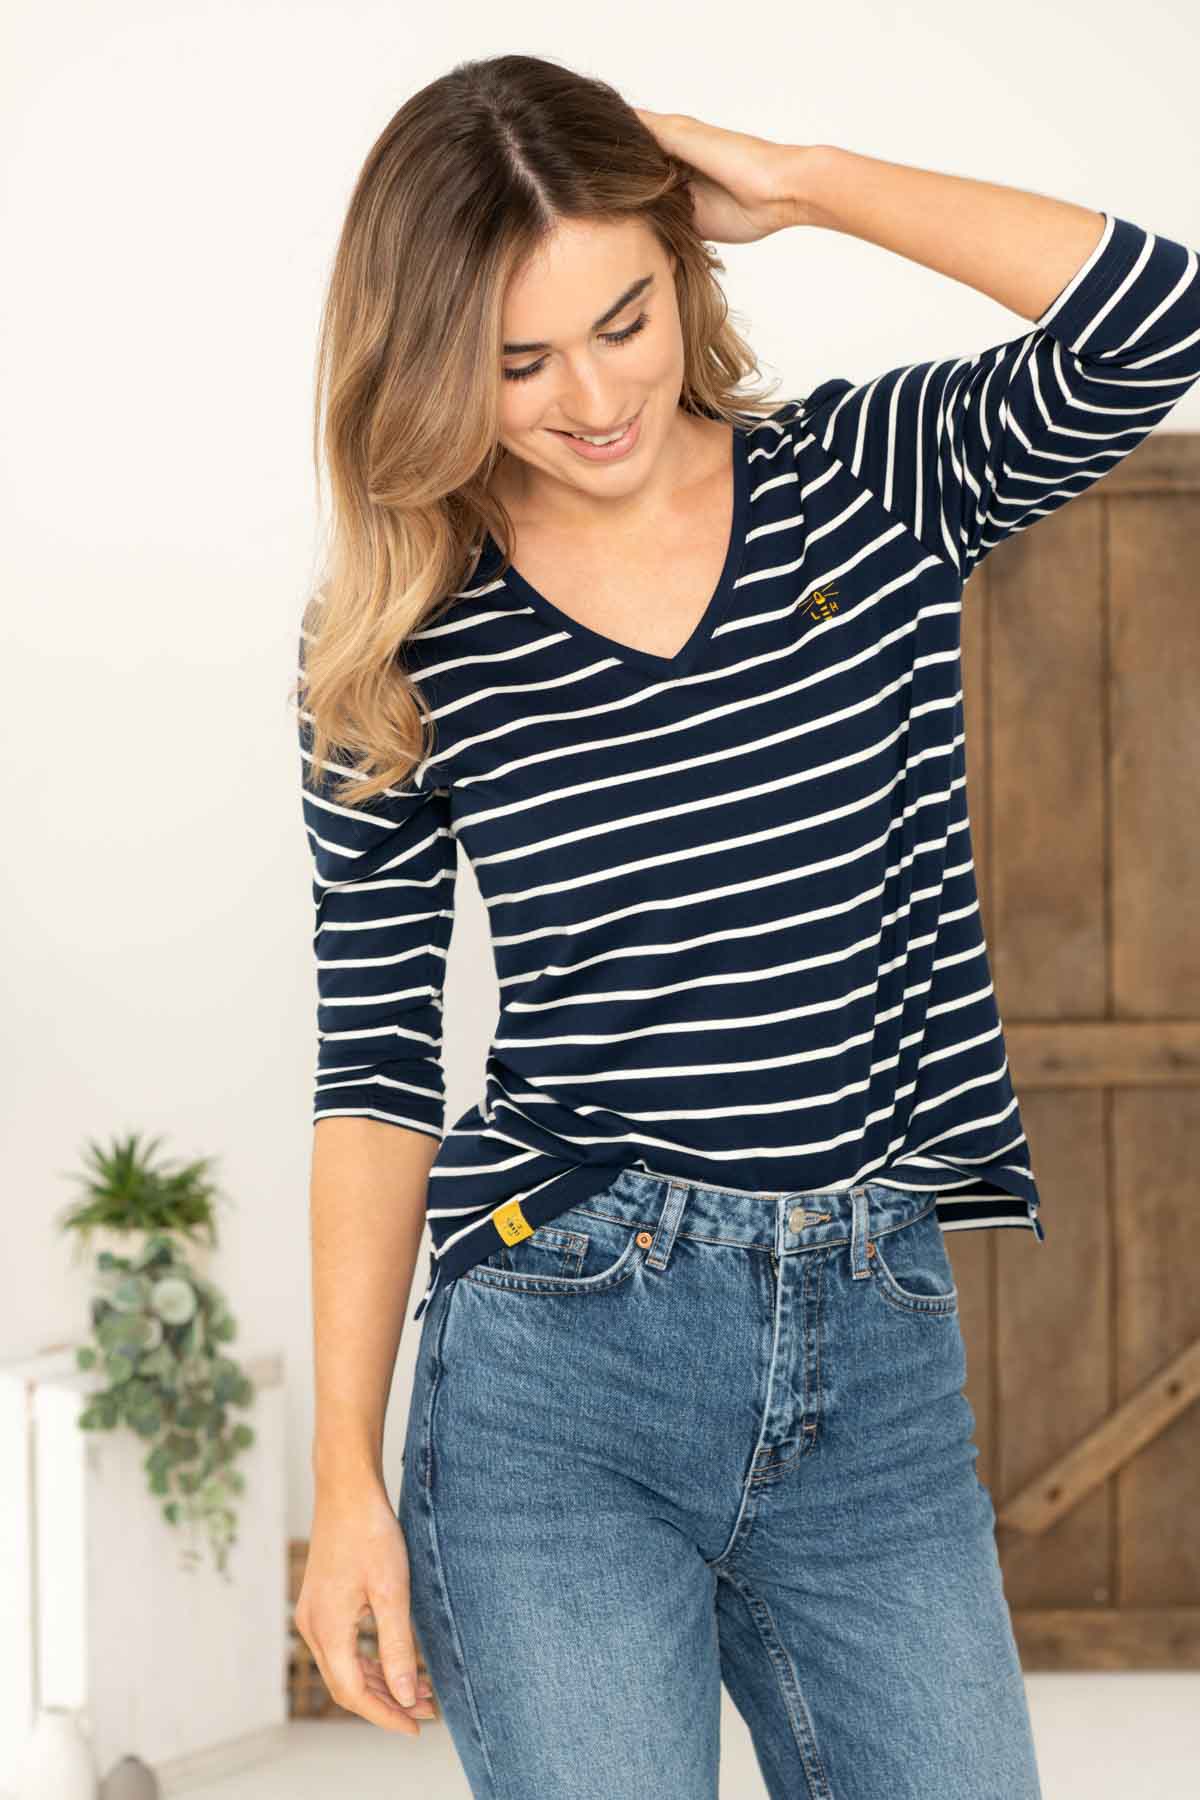 Lighthouse Ariana in Midnight Stripe with 3/4 Length Sleeve Top